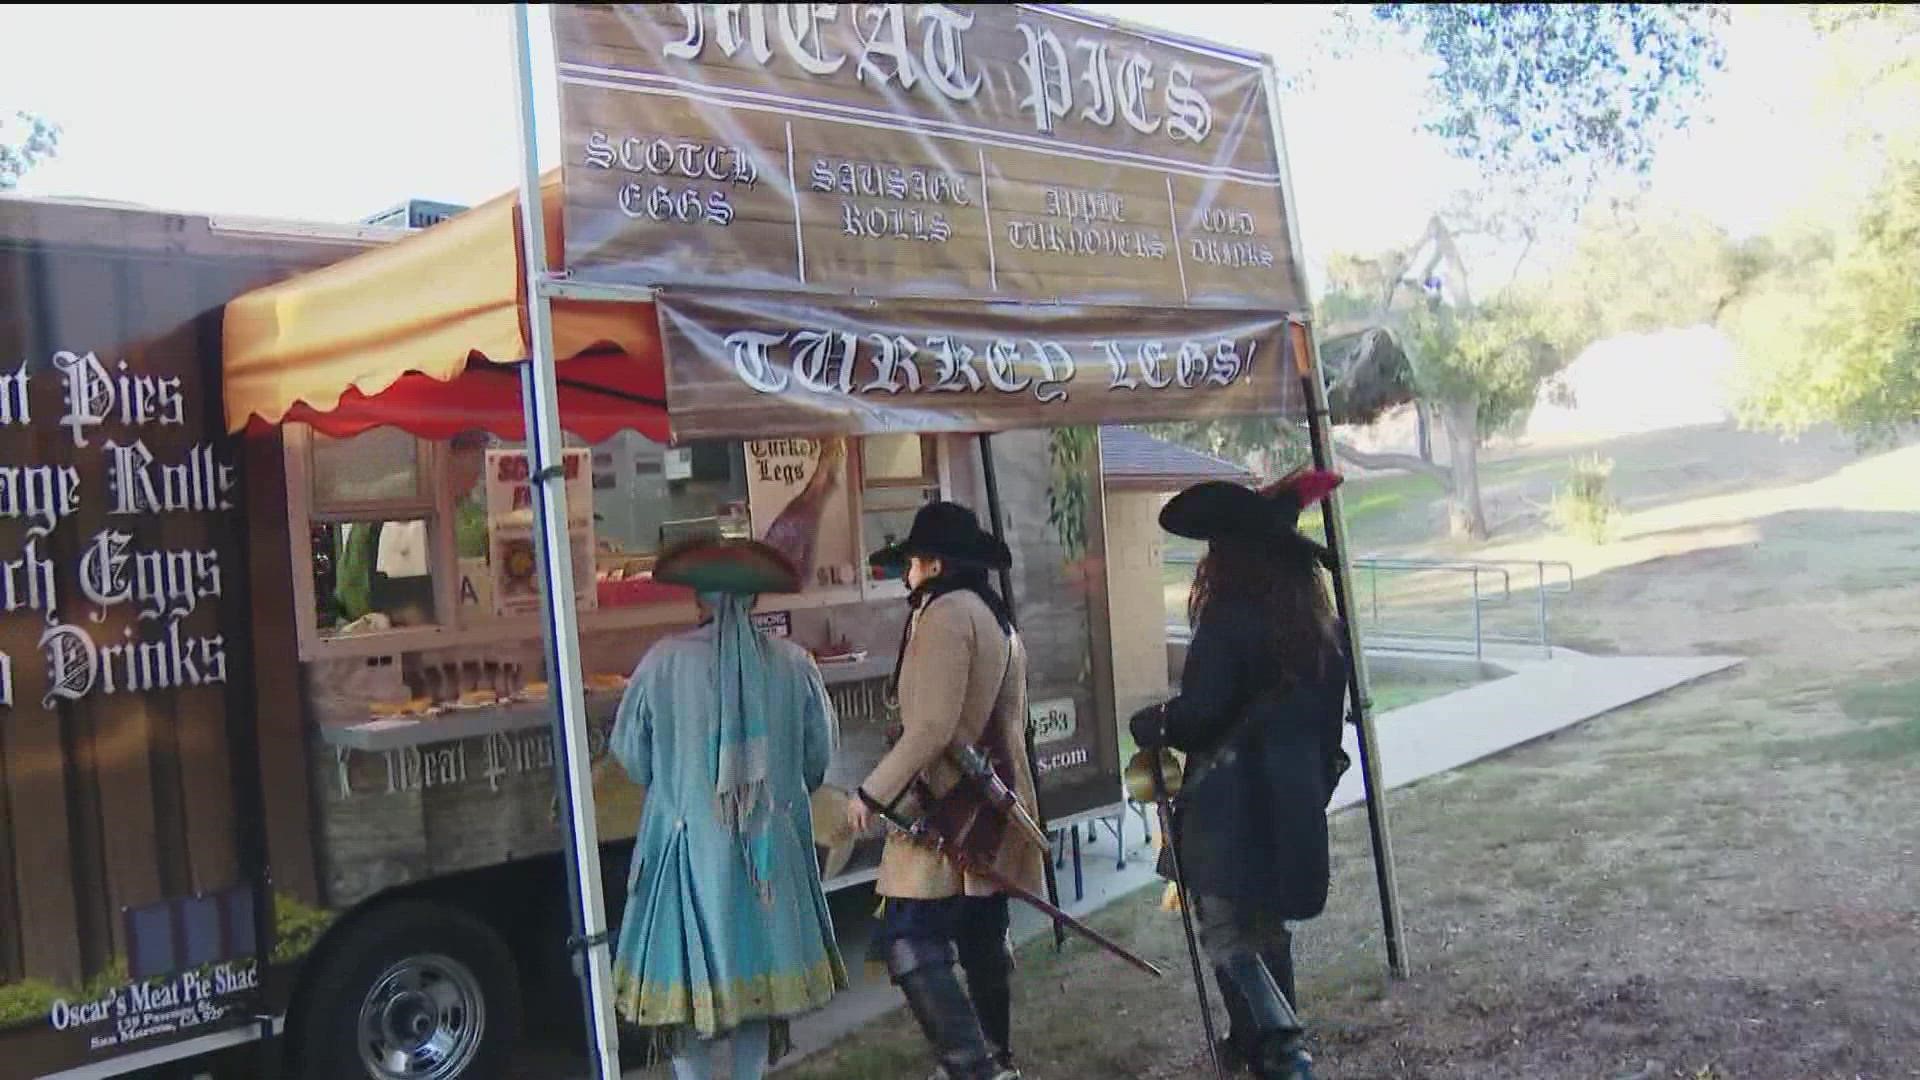 News 8's Chris Gros went back in time to check out the one-of-a-kind faire happening at Felicita Park in Escondido the next two weekends.